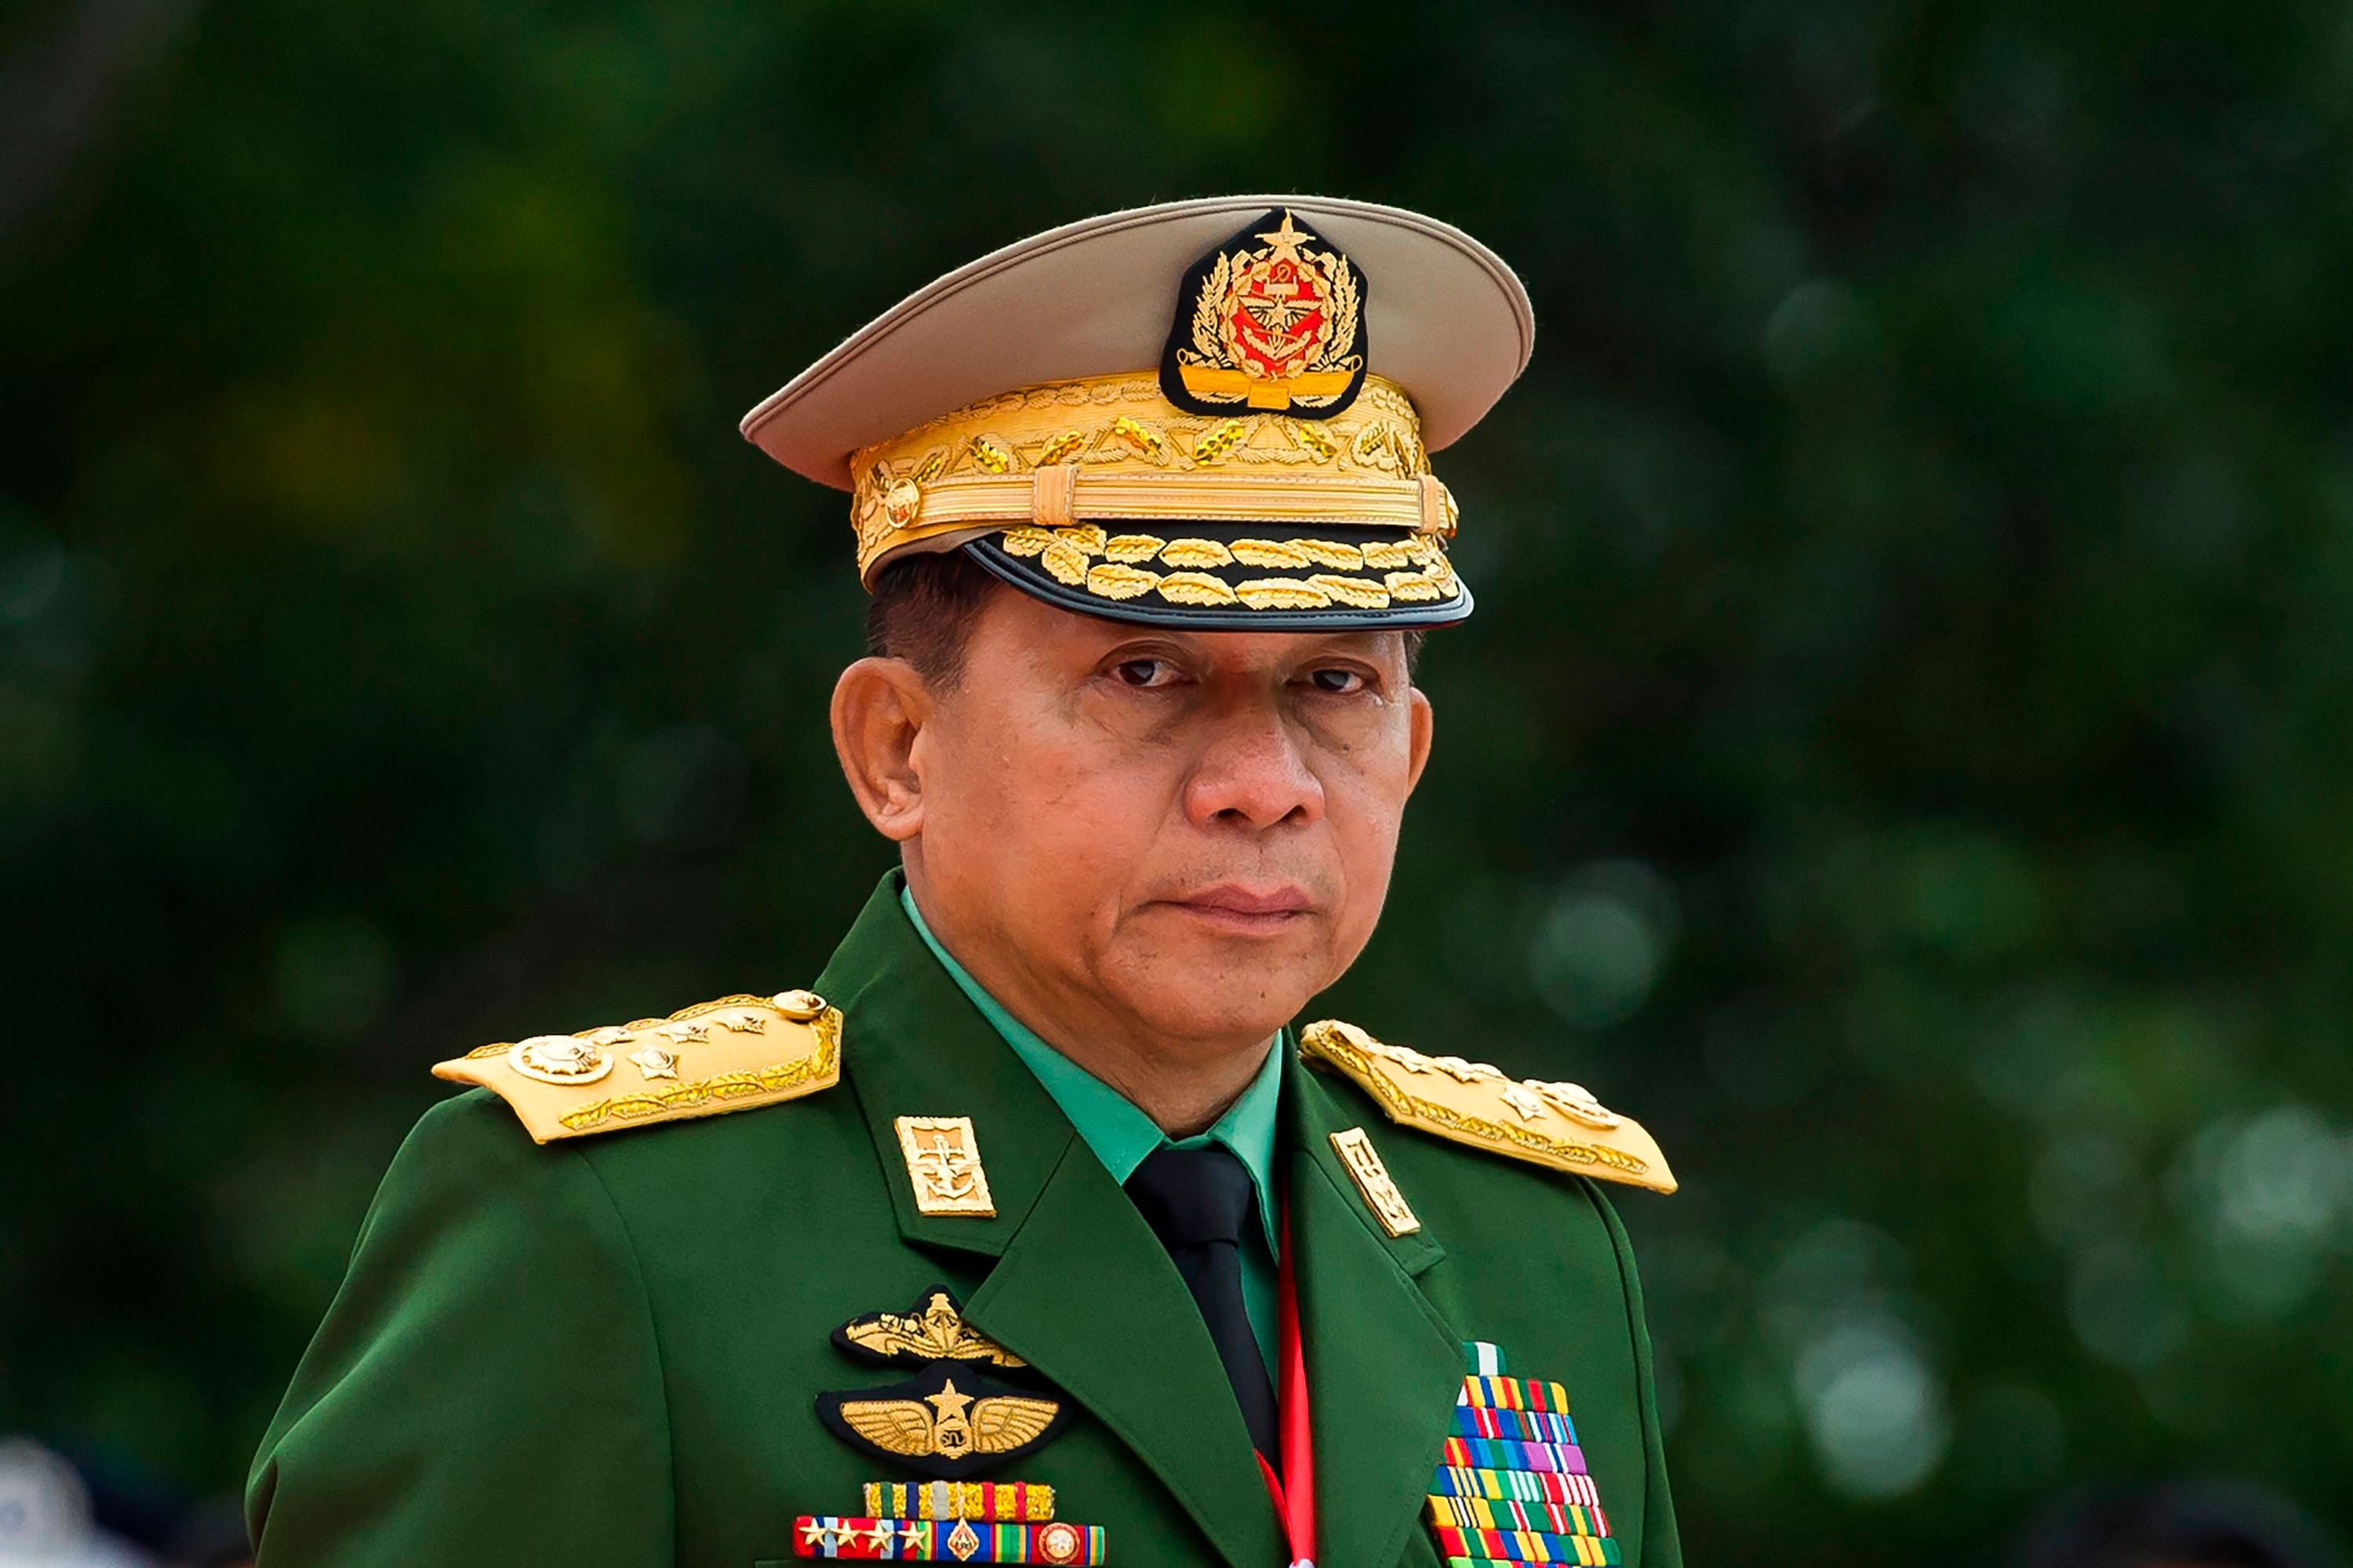 Myanmar's Senior General Min Aung Hlaing, commander-in-chief of the Myanmar armed forces. Credit: AFP File Photo